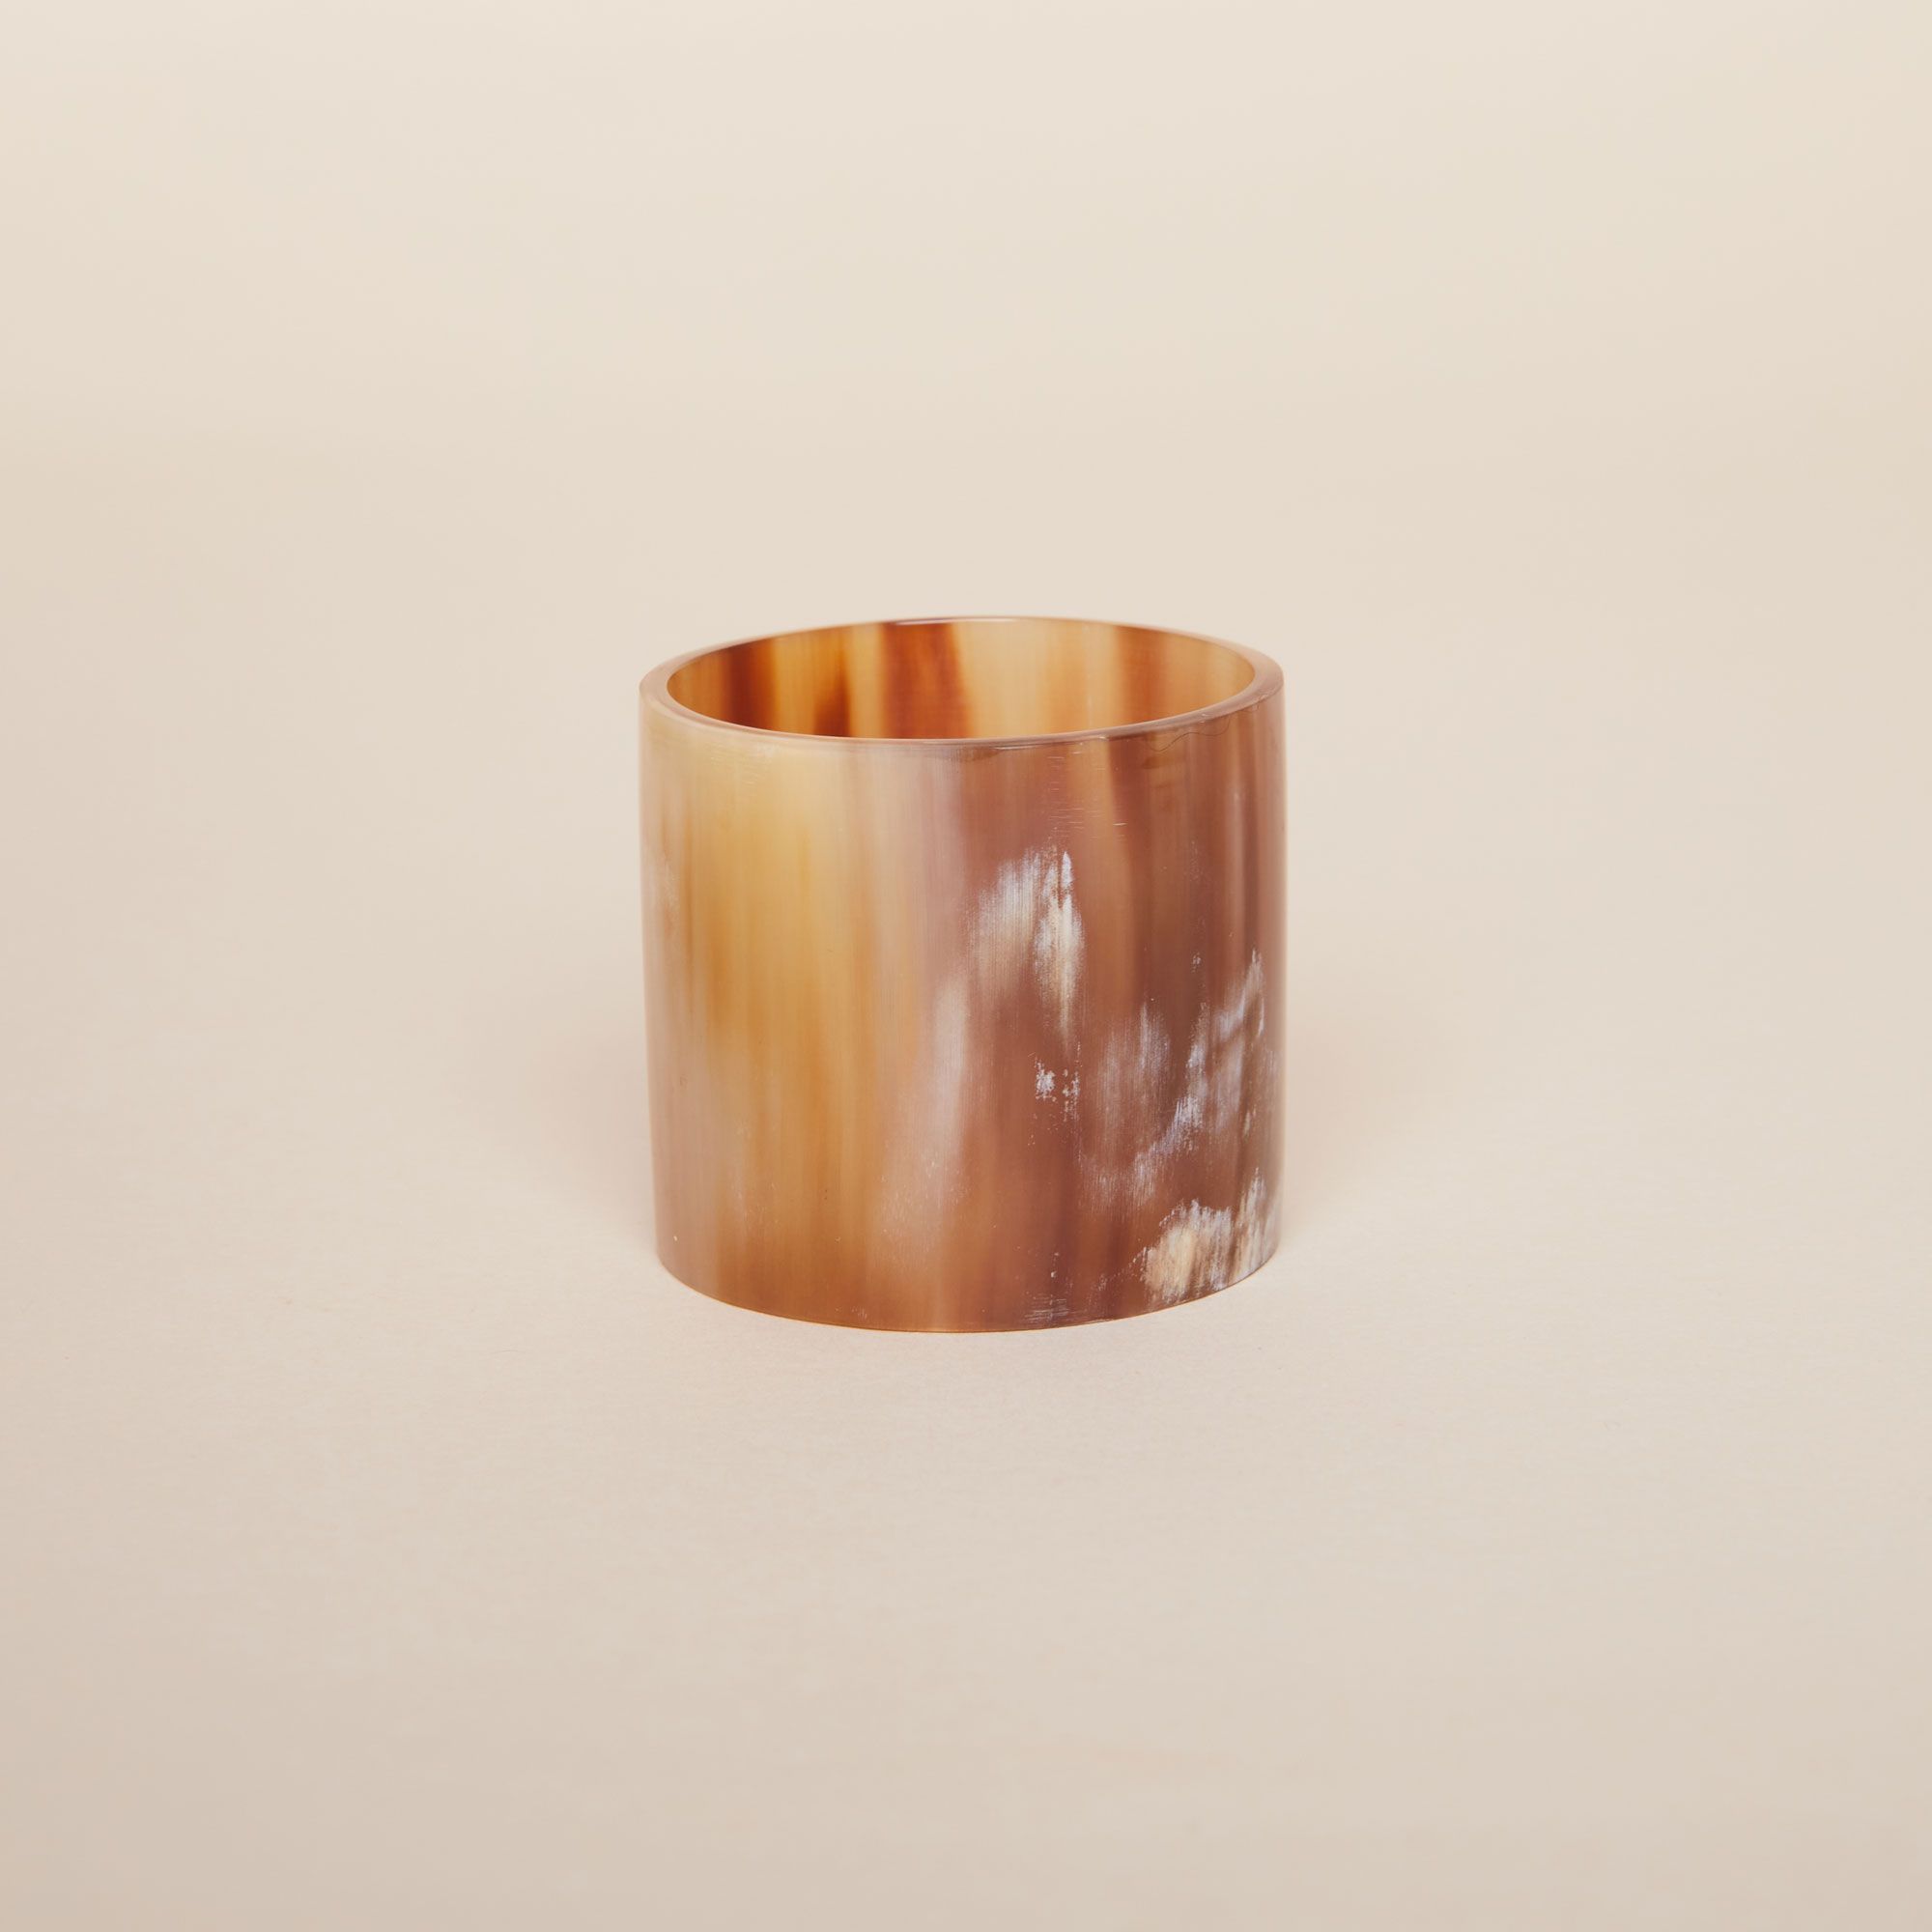 One cylindrical napkin ring with a varigated stripe pattern in browns and whites